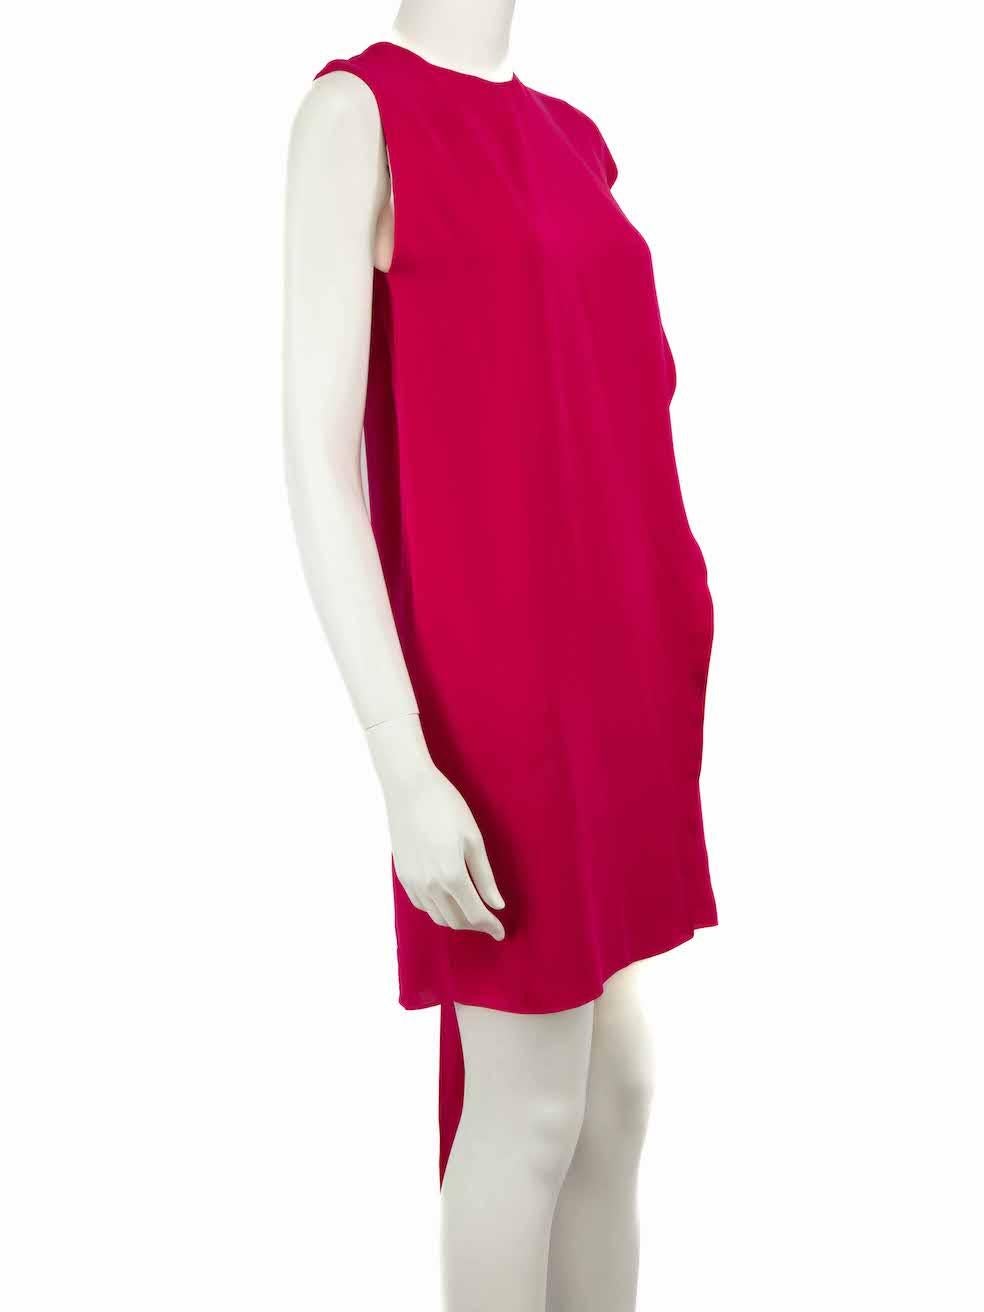 CONDITION is Very good. Minimal wear to dress is evident. Minimal wear to the right shoulder with a chip to an internal button fastening and a pull and mark to the weave of the sash on this used Gucci designer resale item.
 
 Details
 Pink
 Silk
